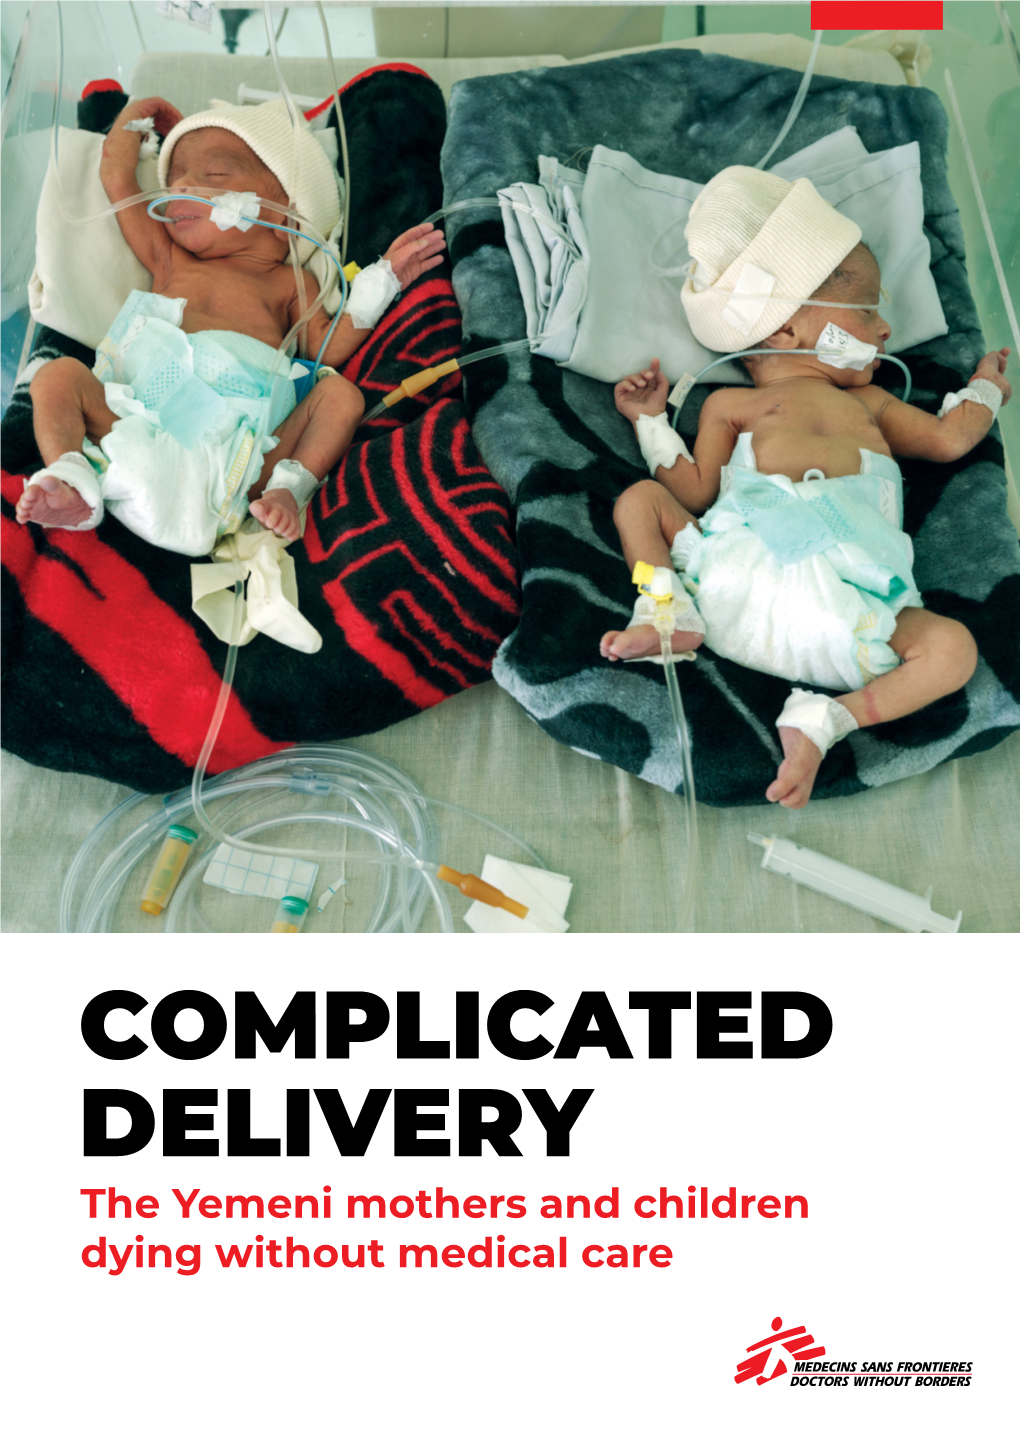 COMPLICATED DELIVERY the Yemeni Mothers and Children Dying Without Medical Care the YEMENI MOTHERS and CHILDREN DYING WITHOUT MEDICAL CARE